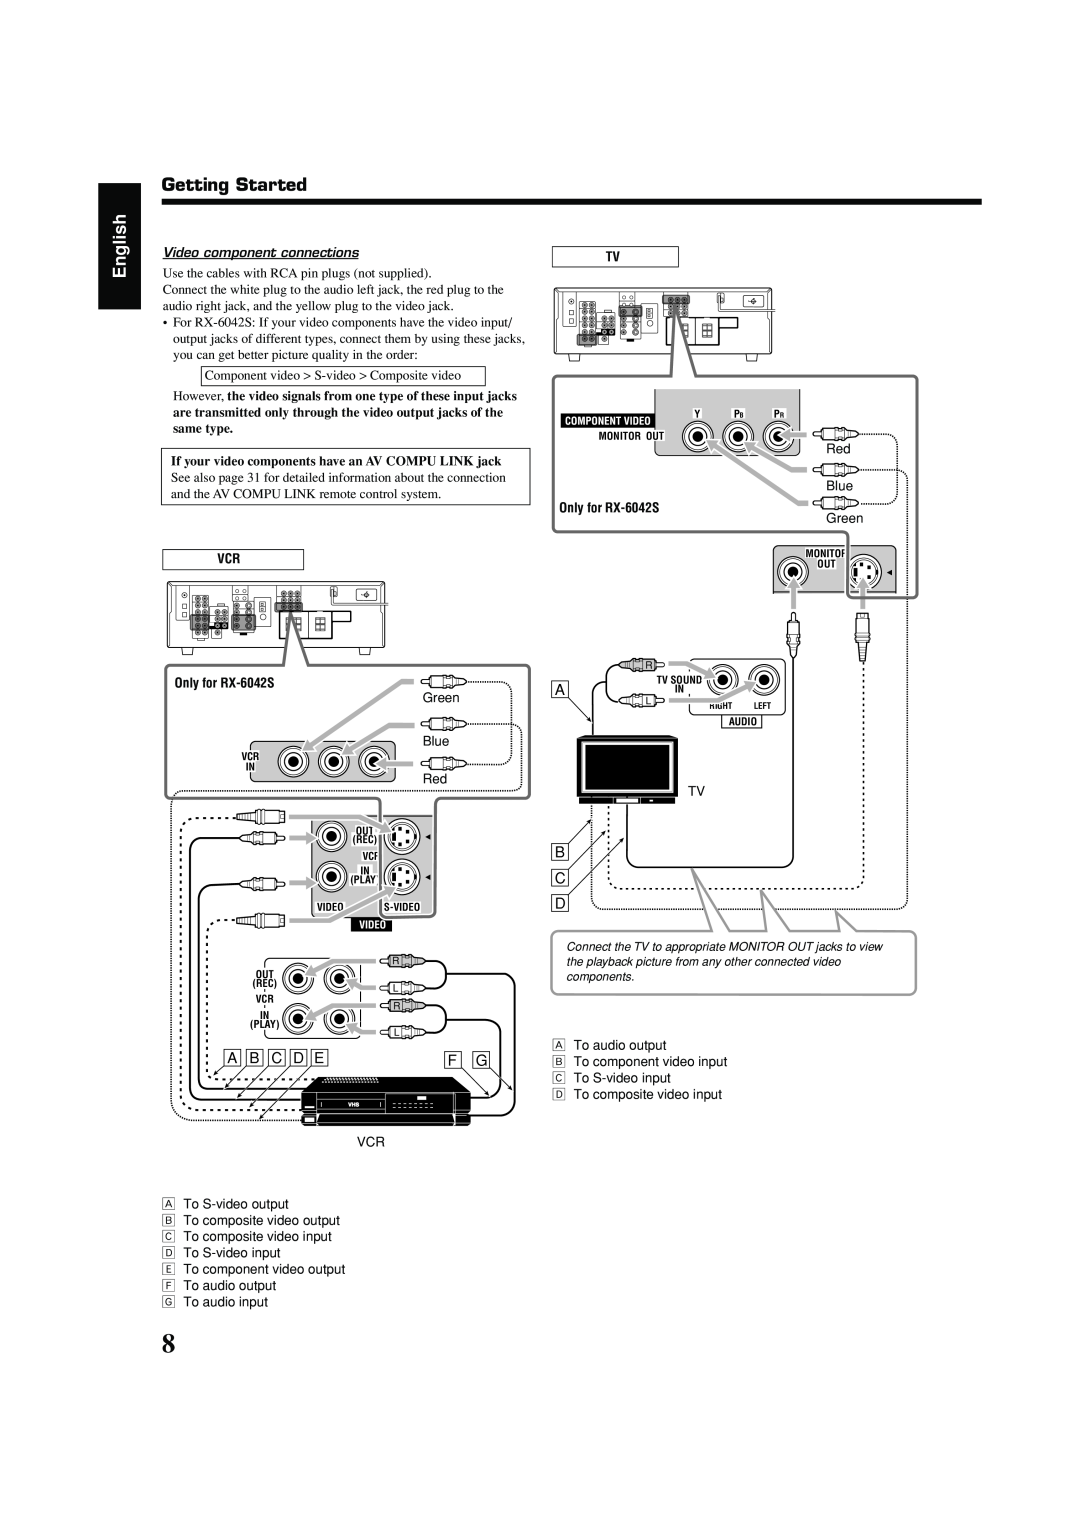 JVC LVT1140-004A manual English, Getting Started, A B C D E, Video component connections 